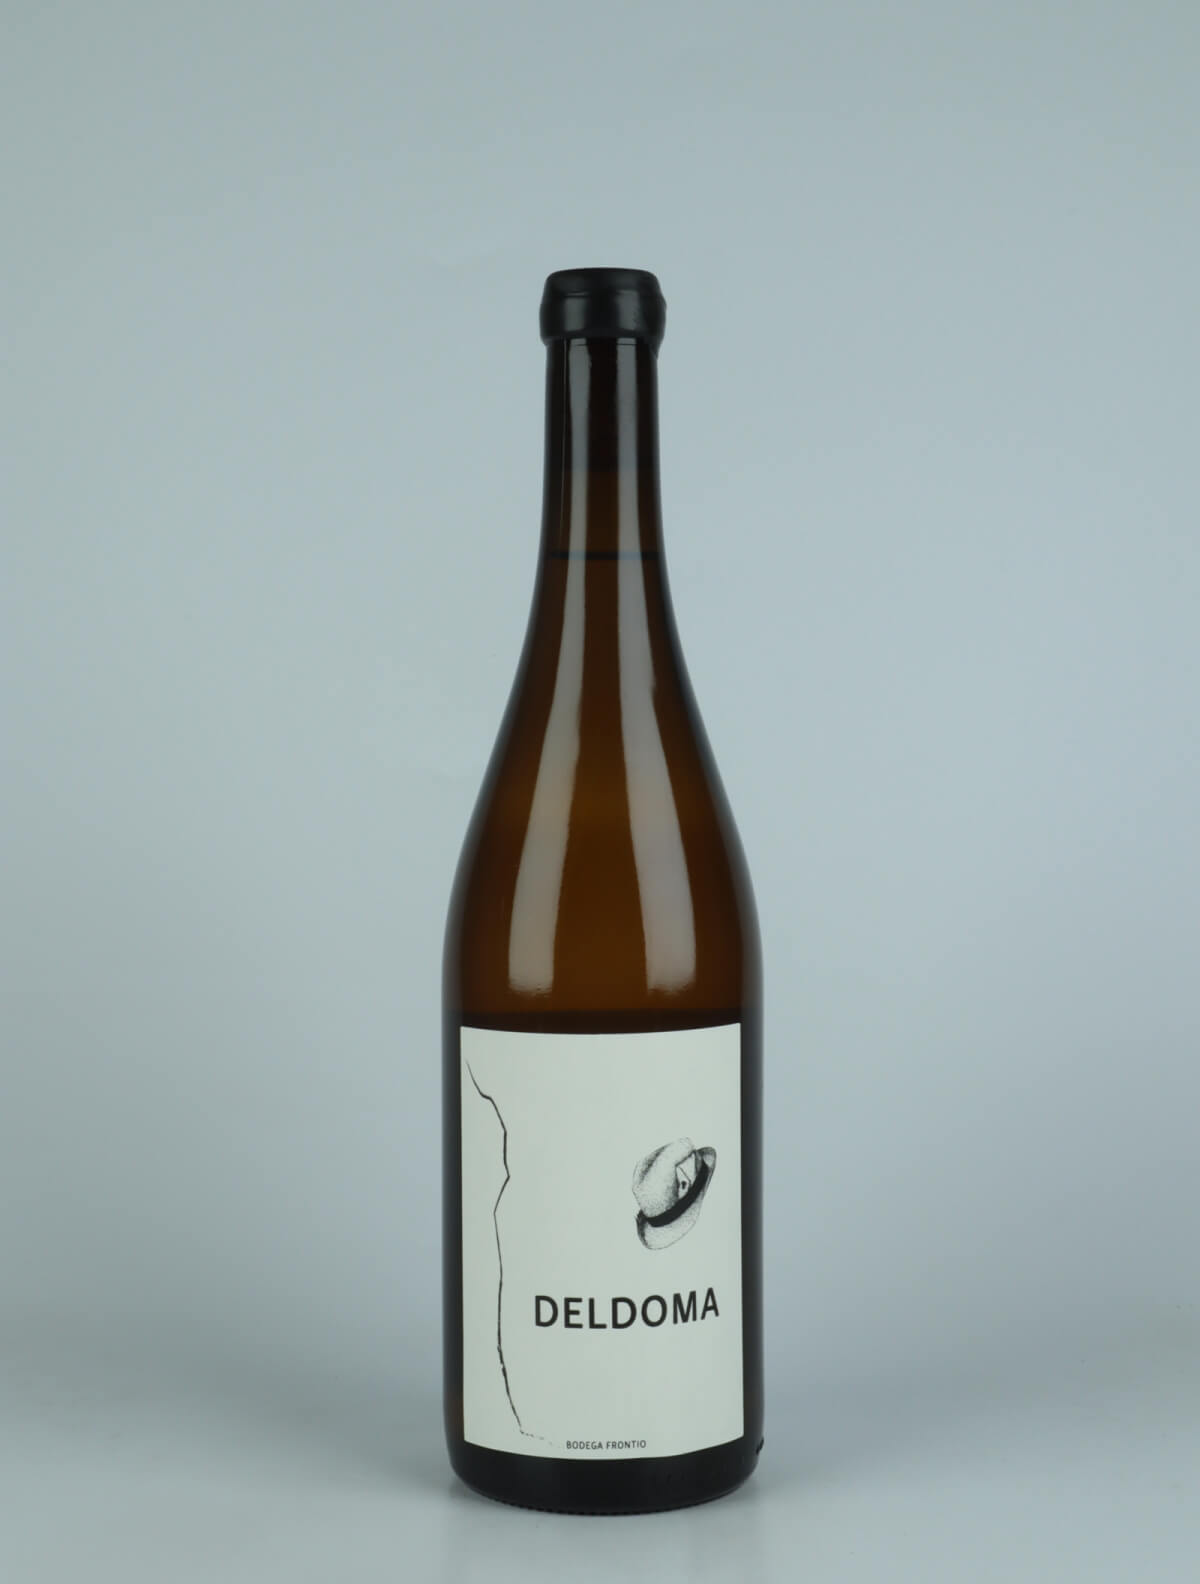 A bottle 2022 Deldoma White wine from Bodega Frontio, Arribes in Spain